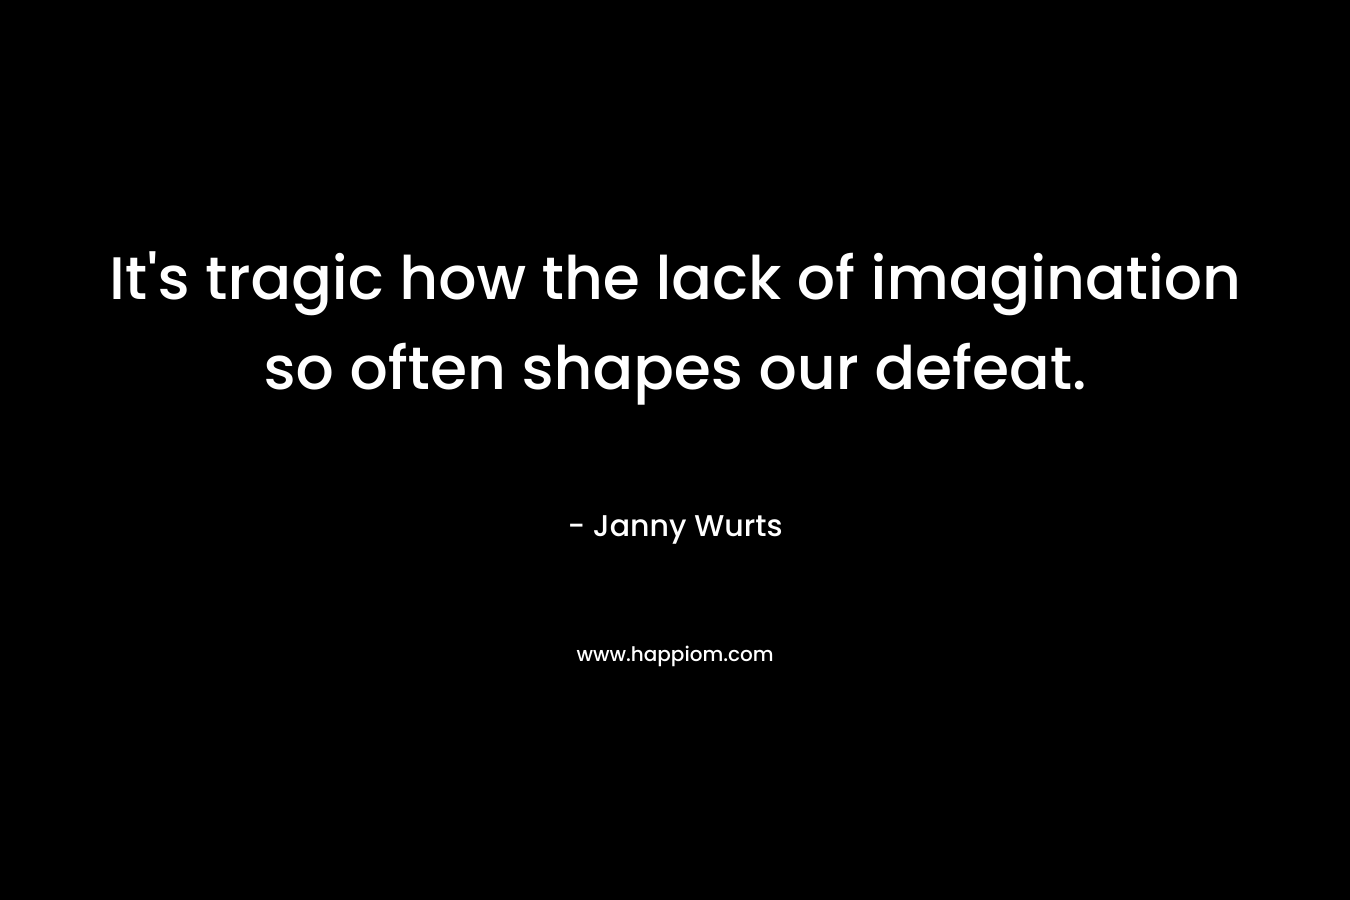 It's tragic how the lack of imagination so often shapes our defeat.